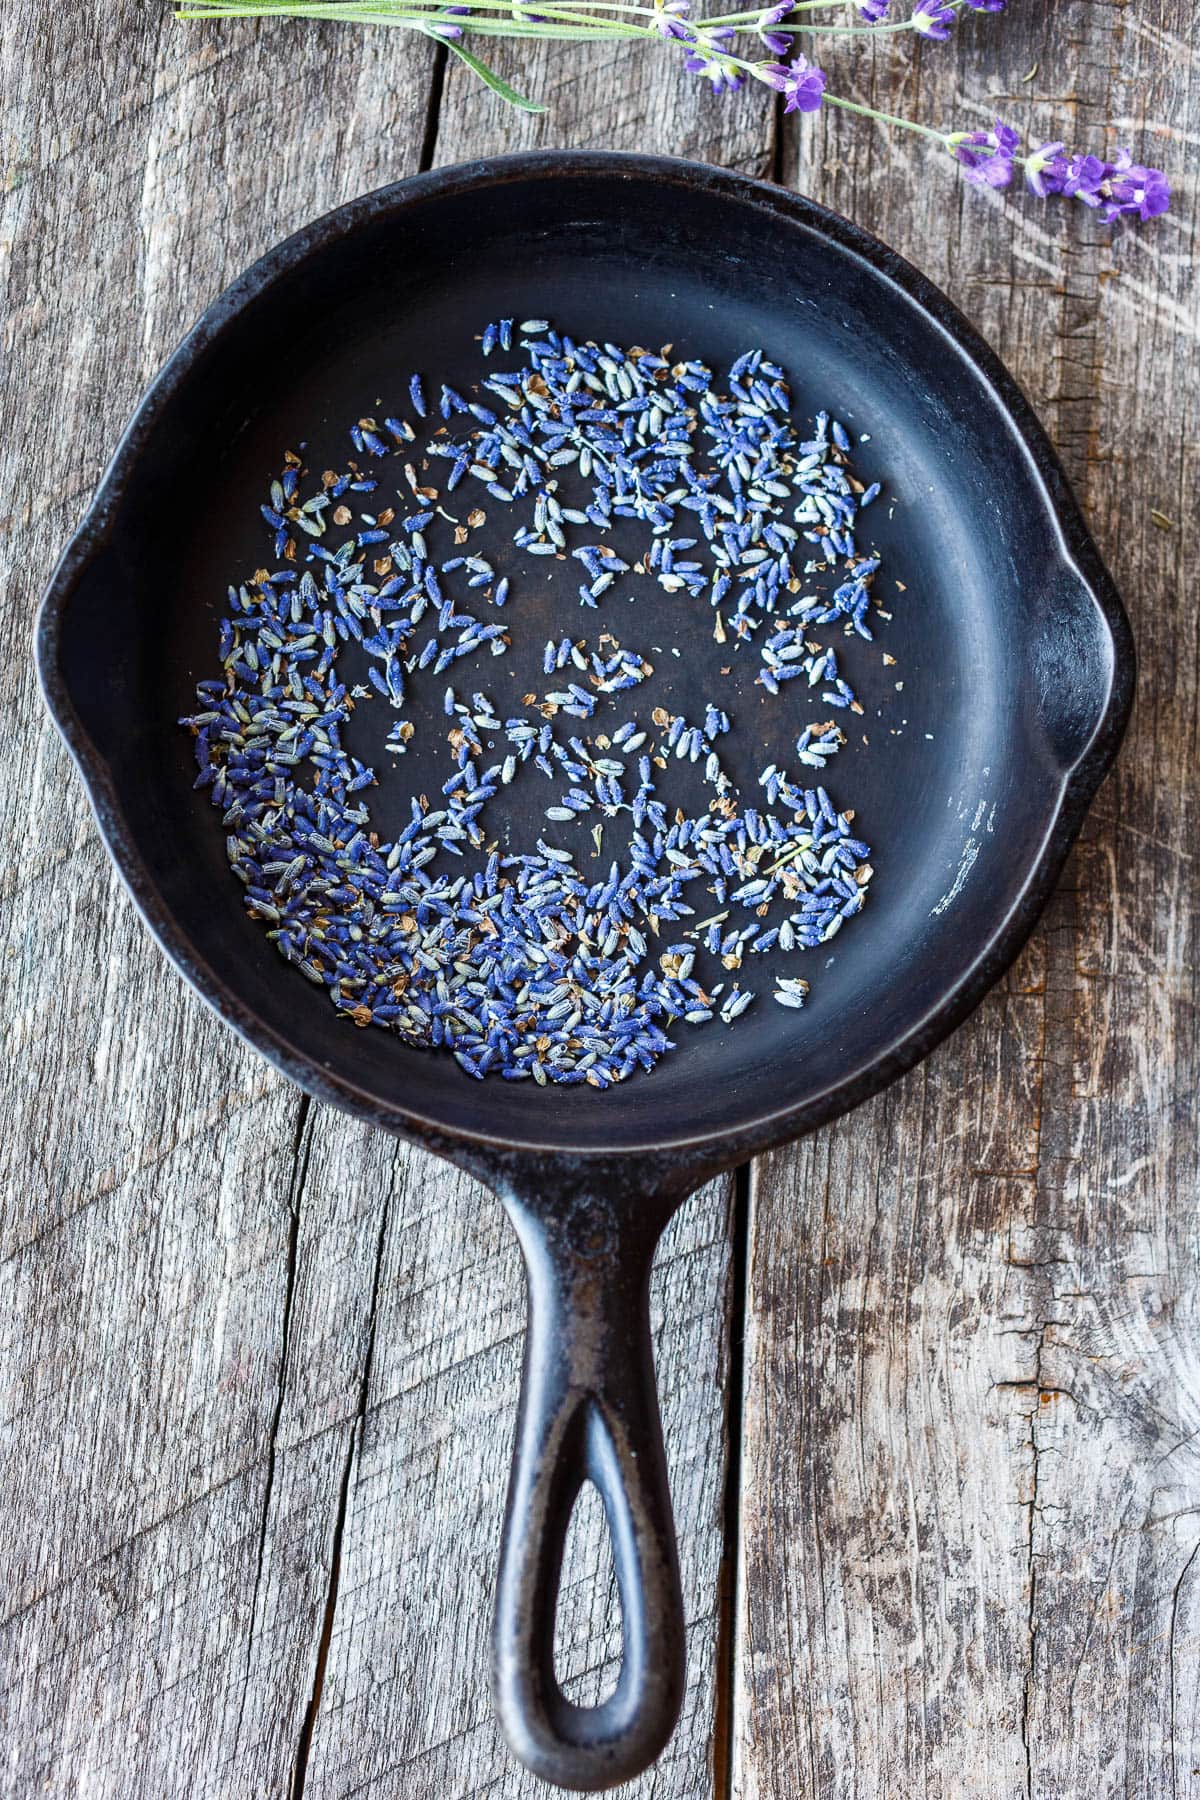 Roasting dried lavender in a cast iron skillet to quell some of the floral notes.